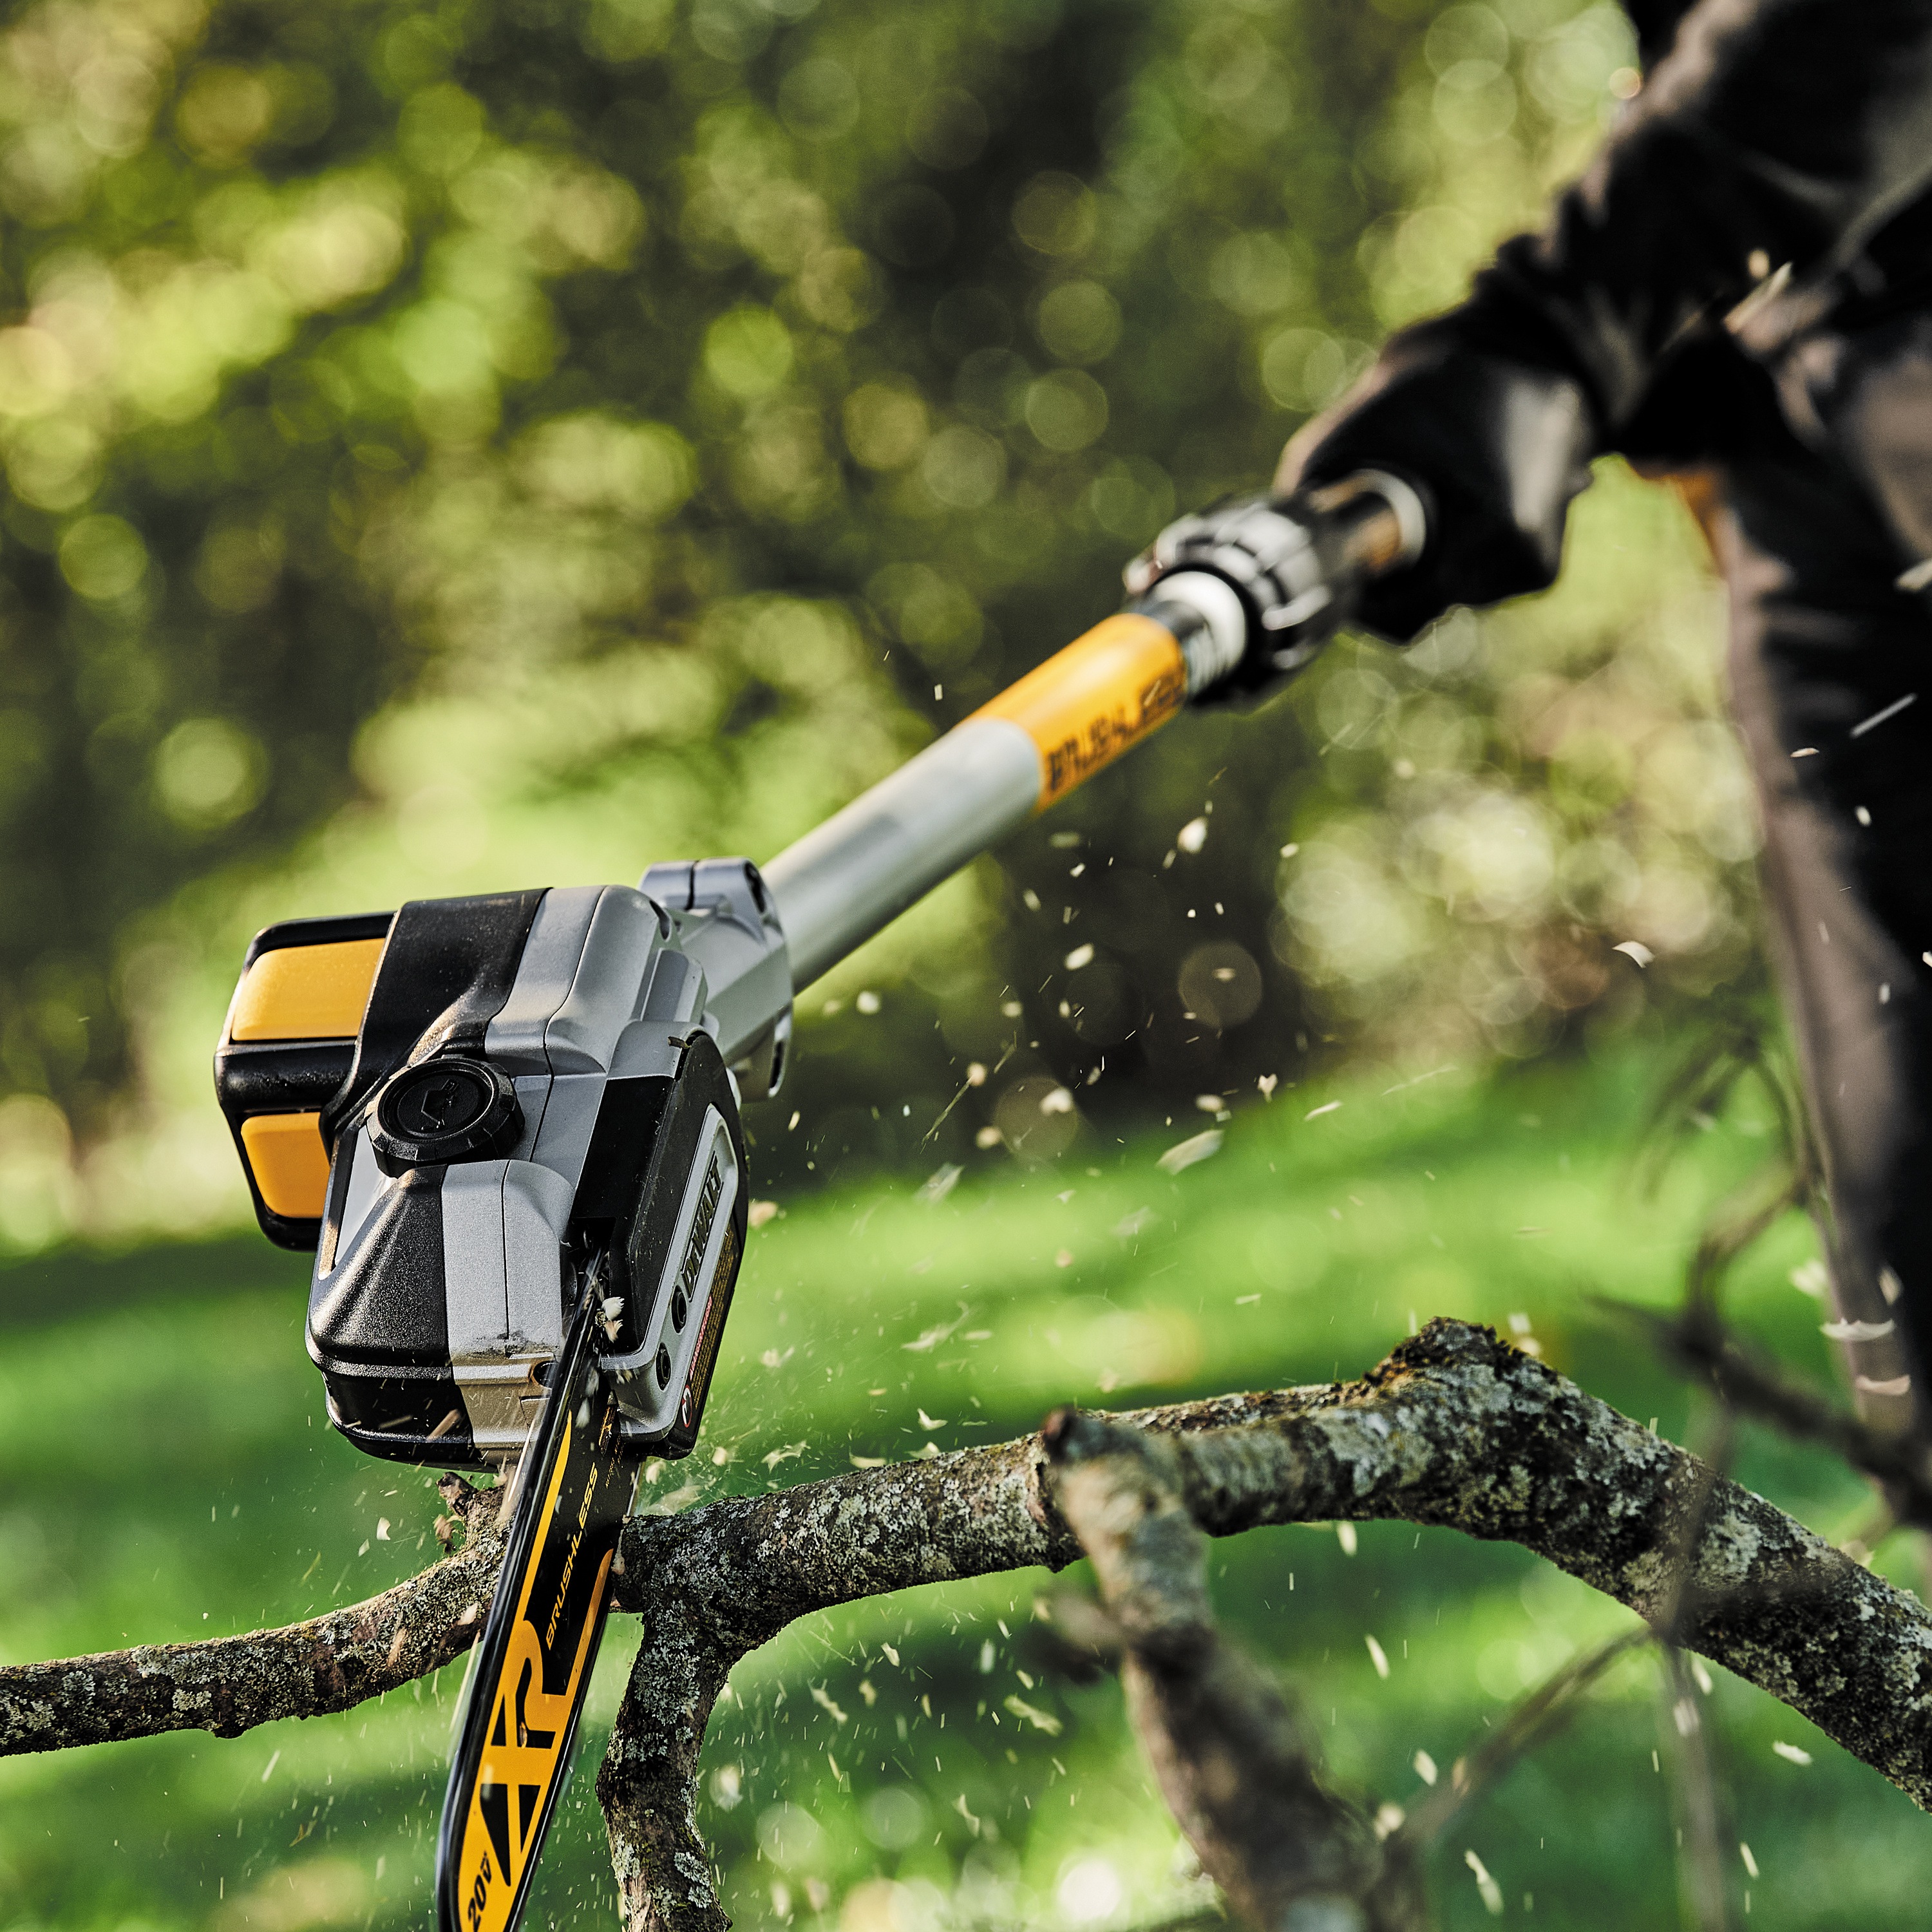 Brushless Cordless Pole Saw pruning branches.